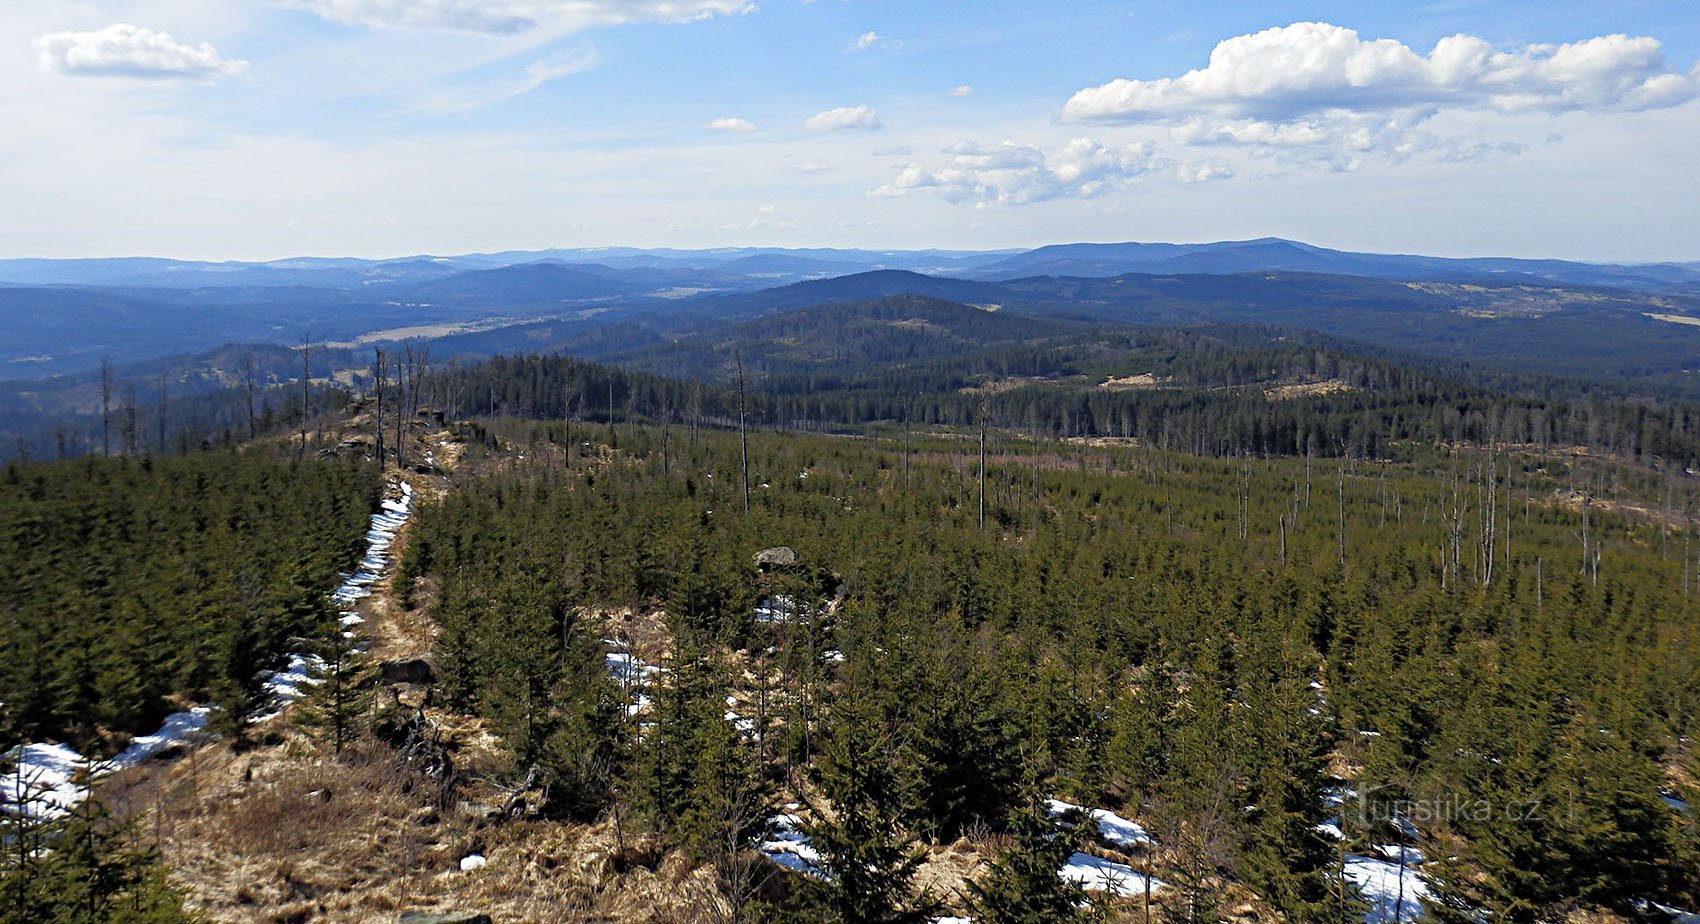 view from the lookout tower on the Prince's Chair